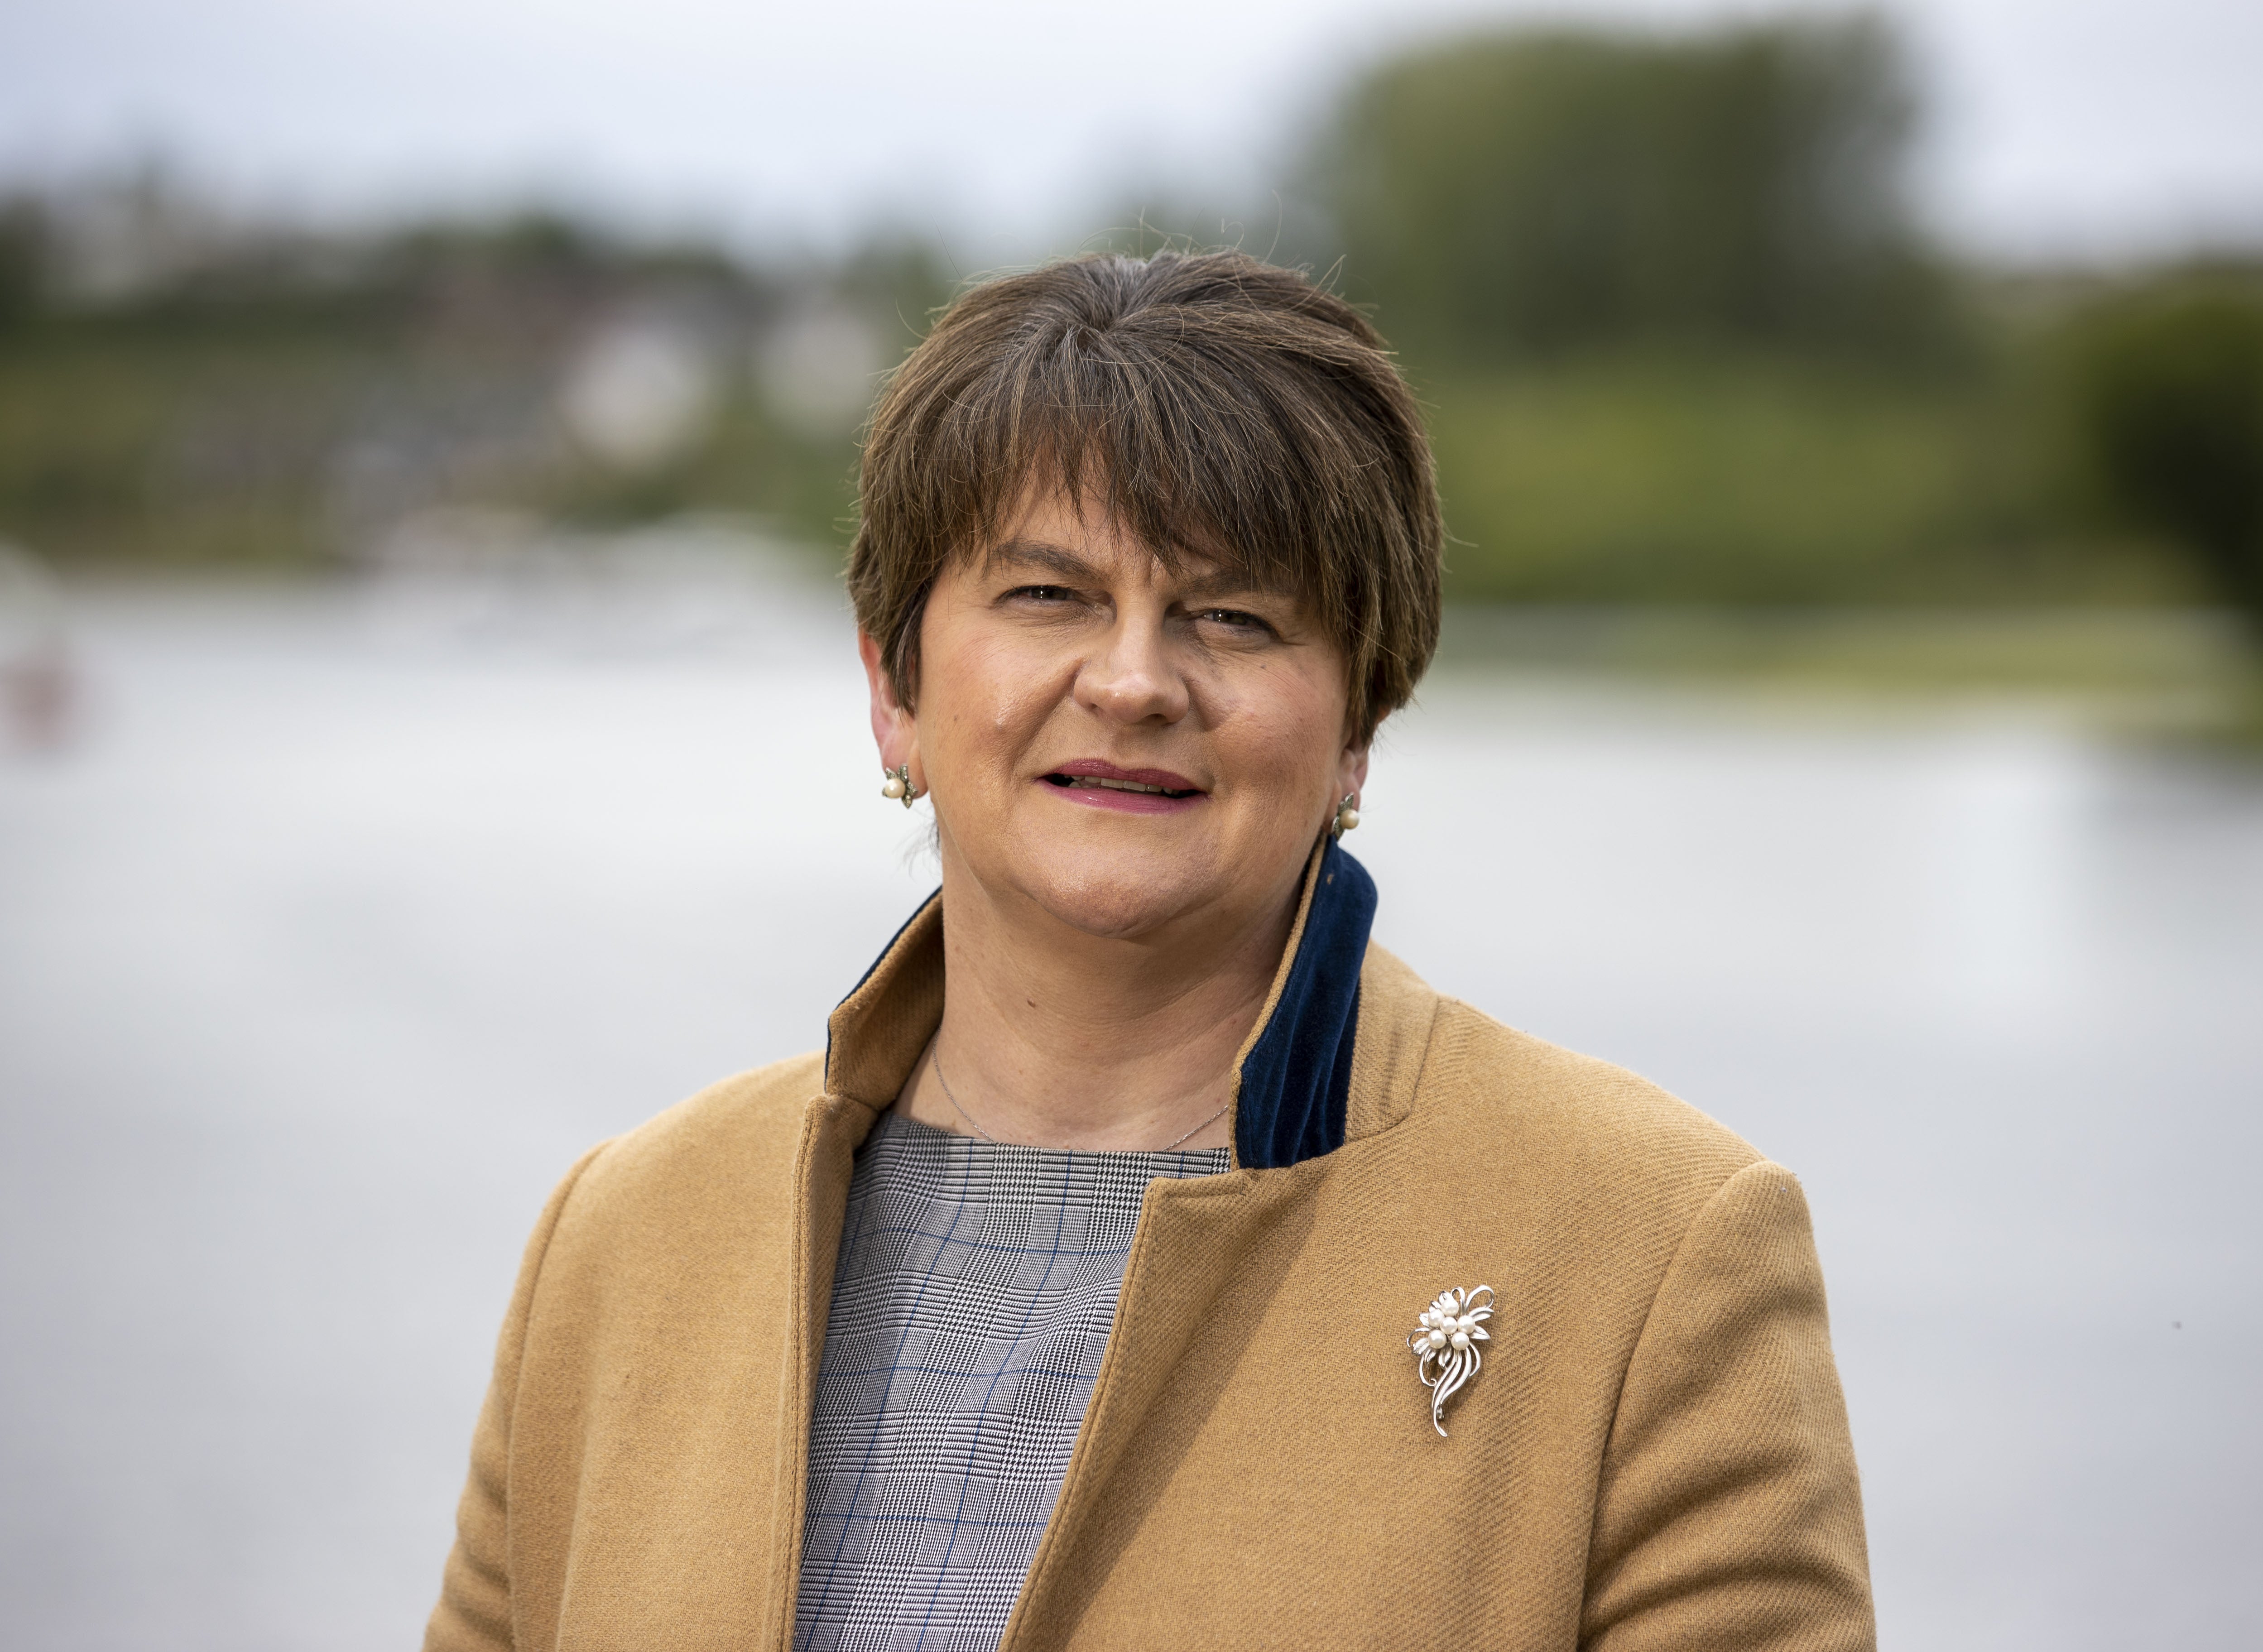 Dame Arlene Foster, former first minister of Northern Ireland (Liam McBurney/PA)